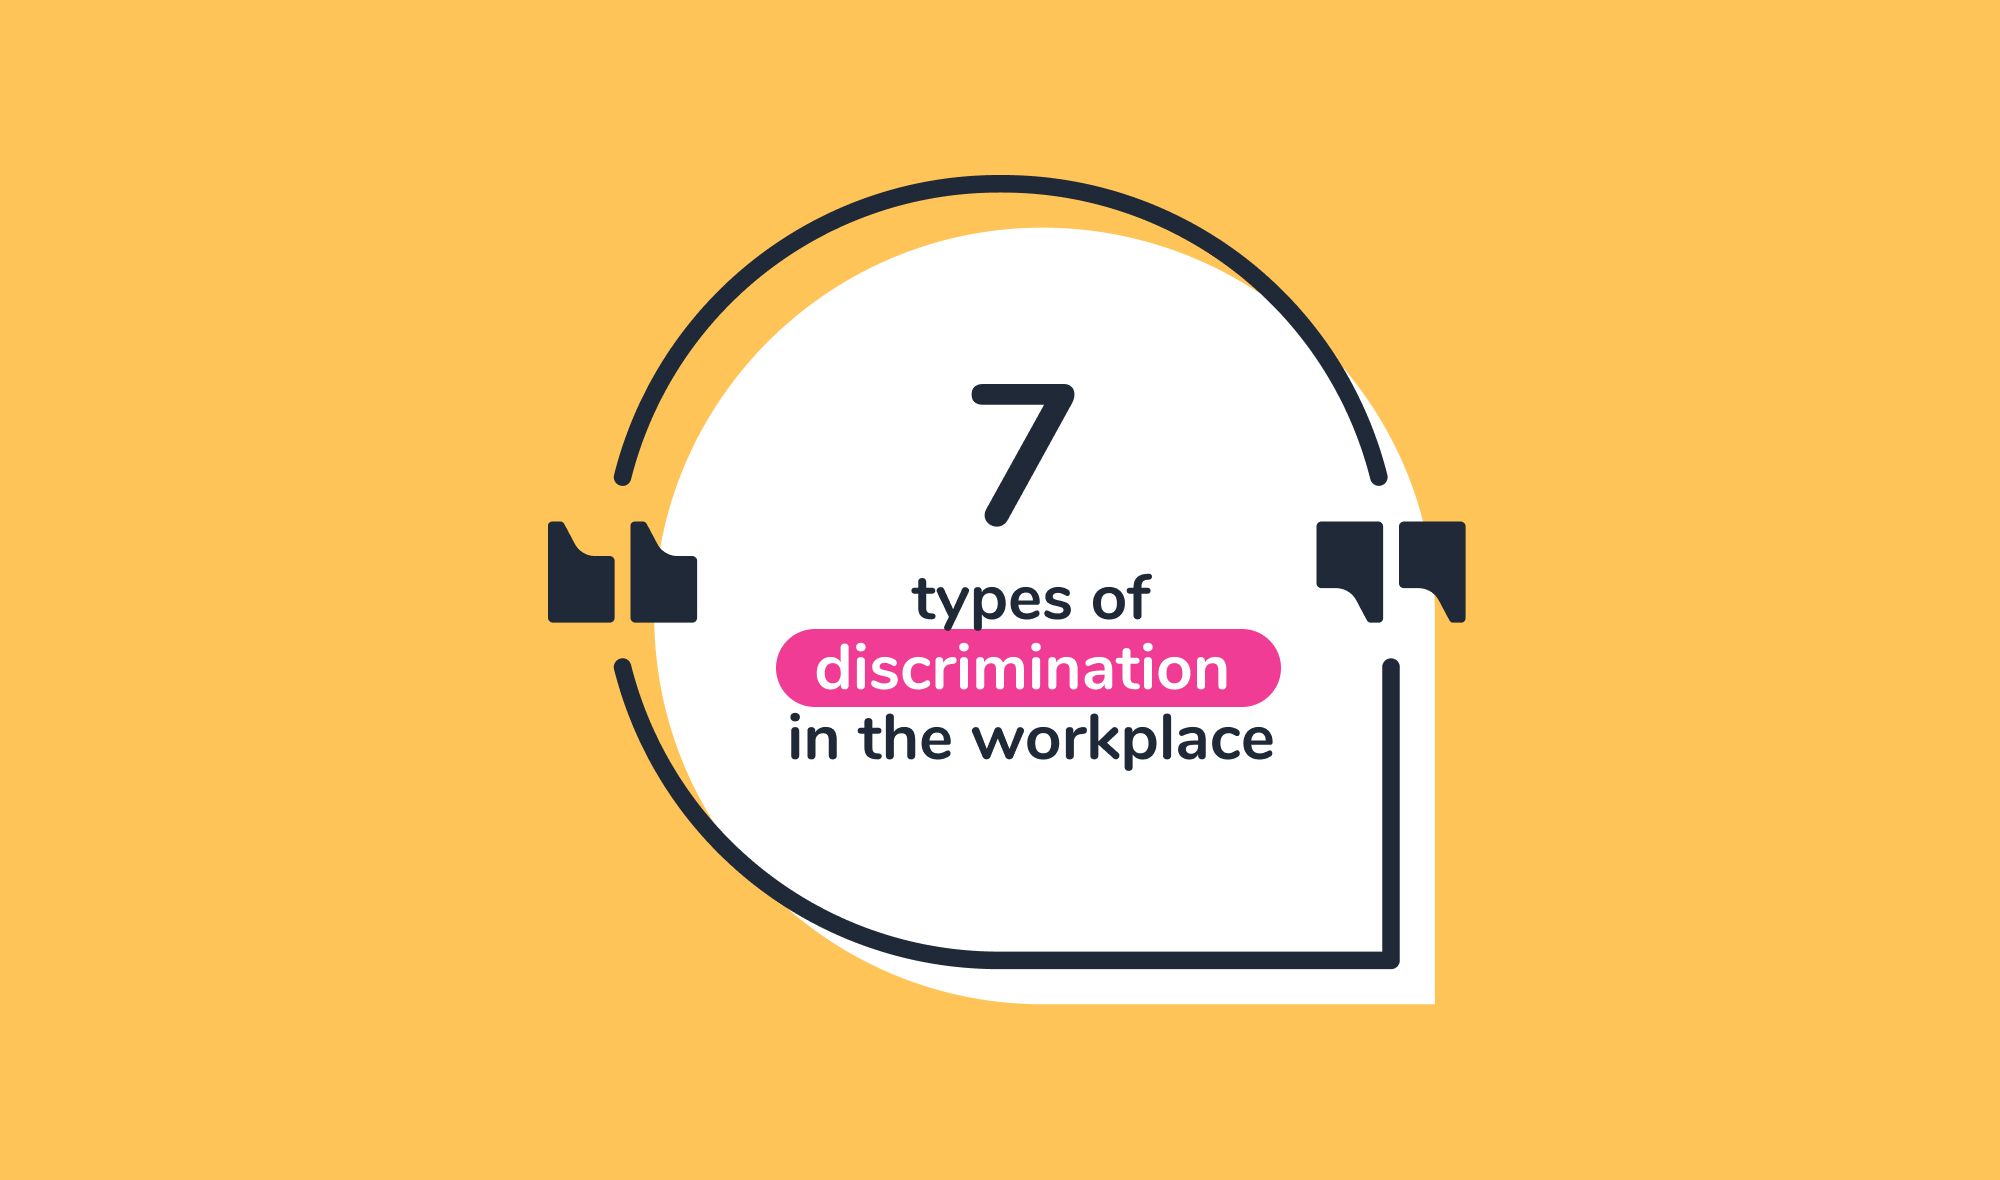 7 types of discrimination in the workplace